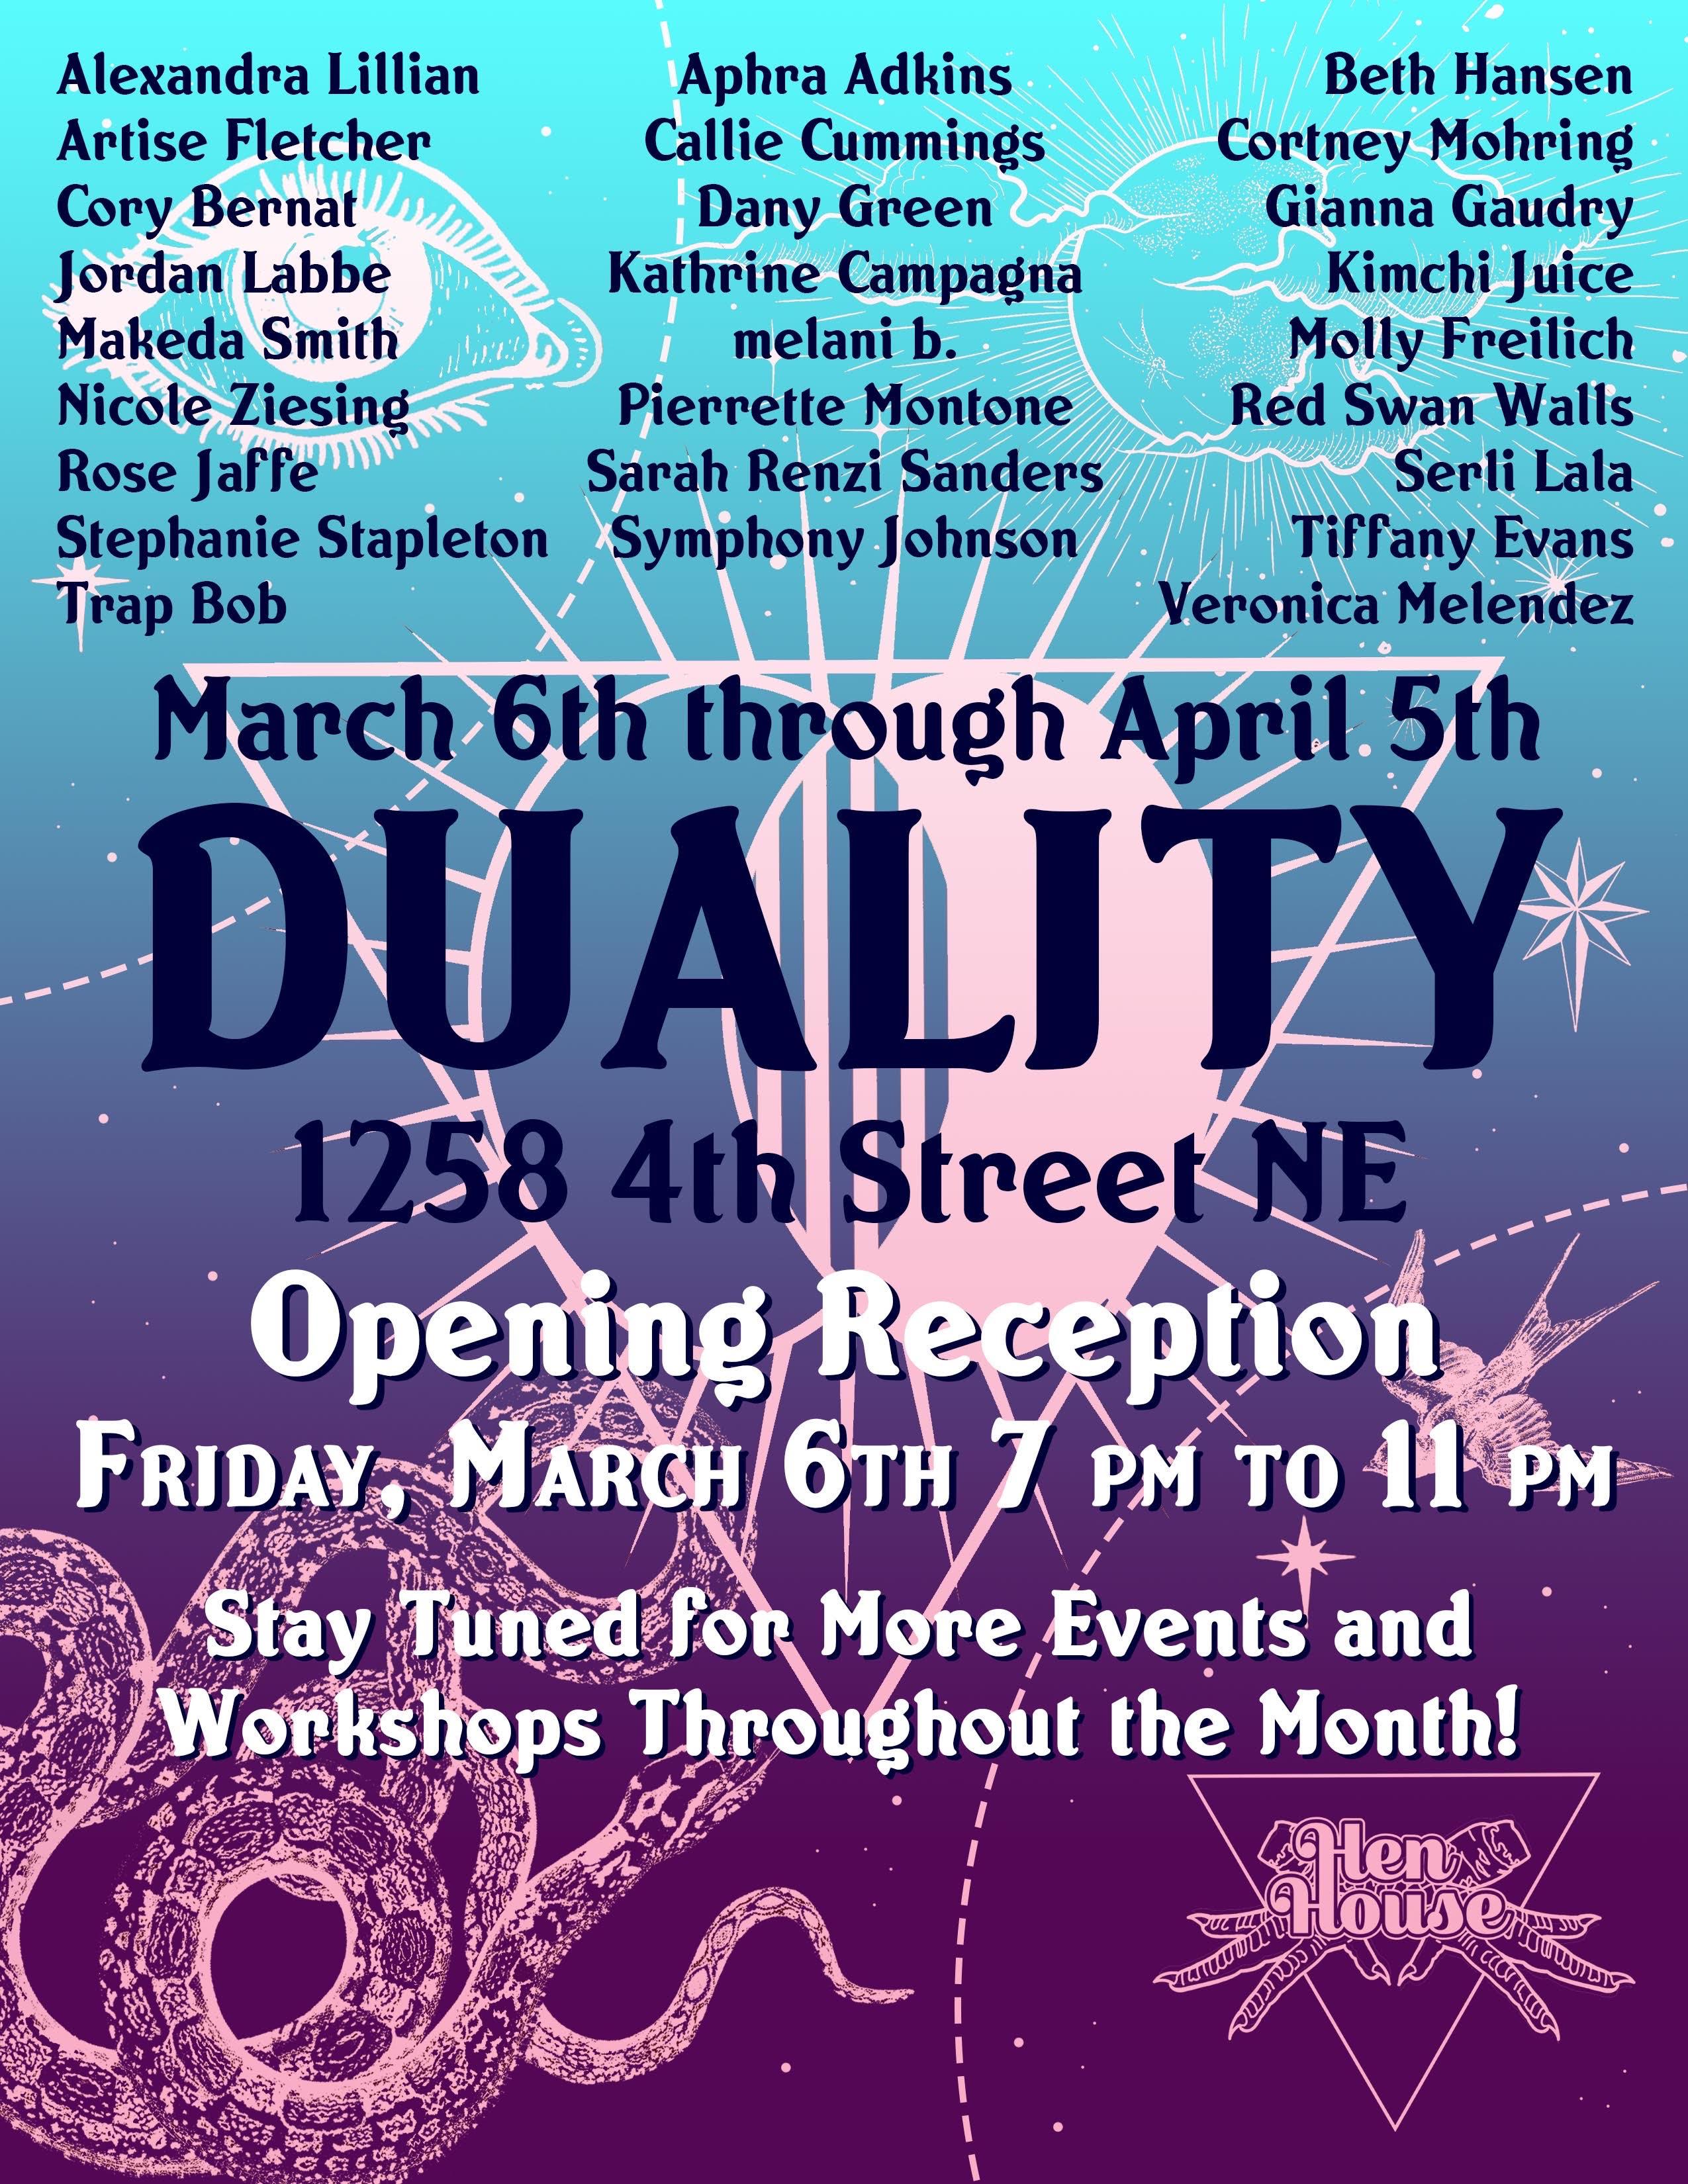 Hen House Presents DUALITY